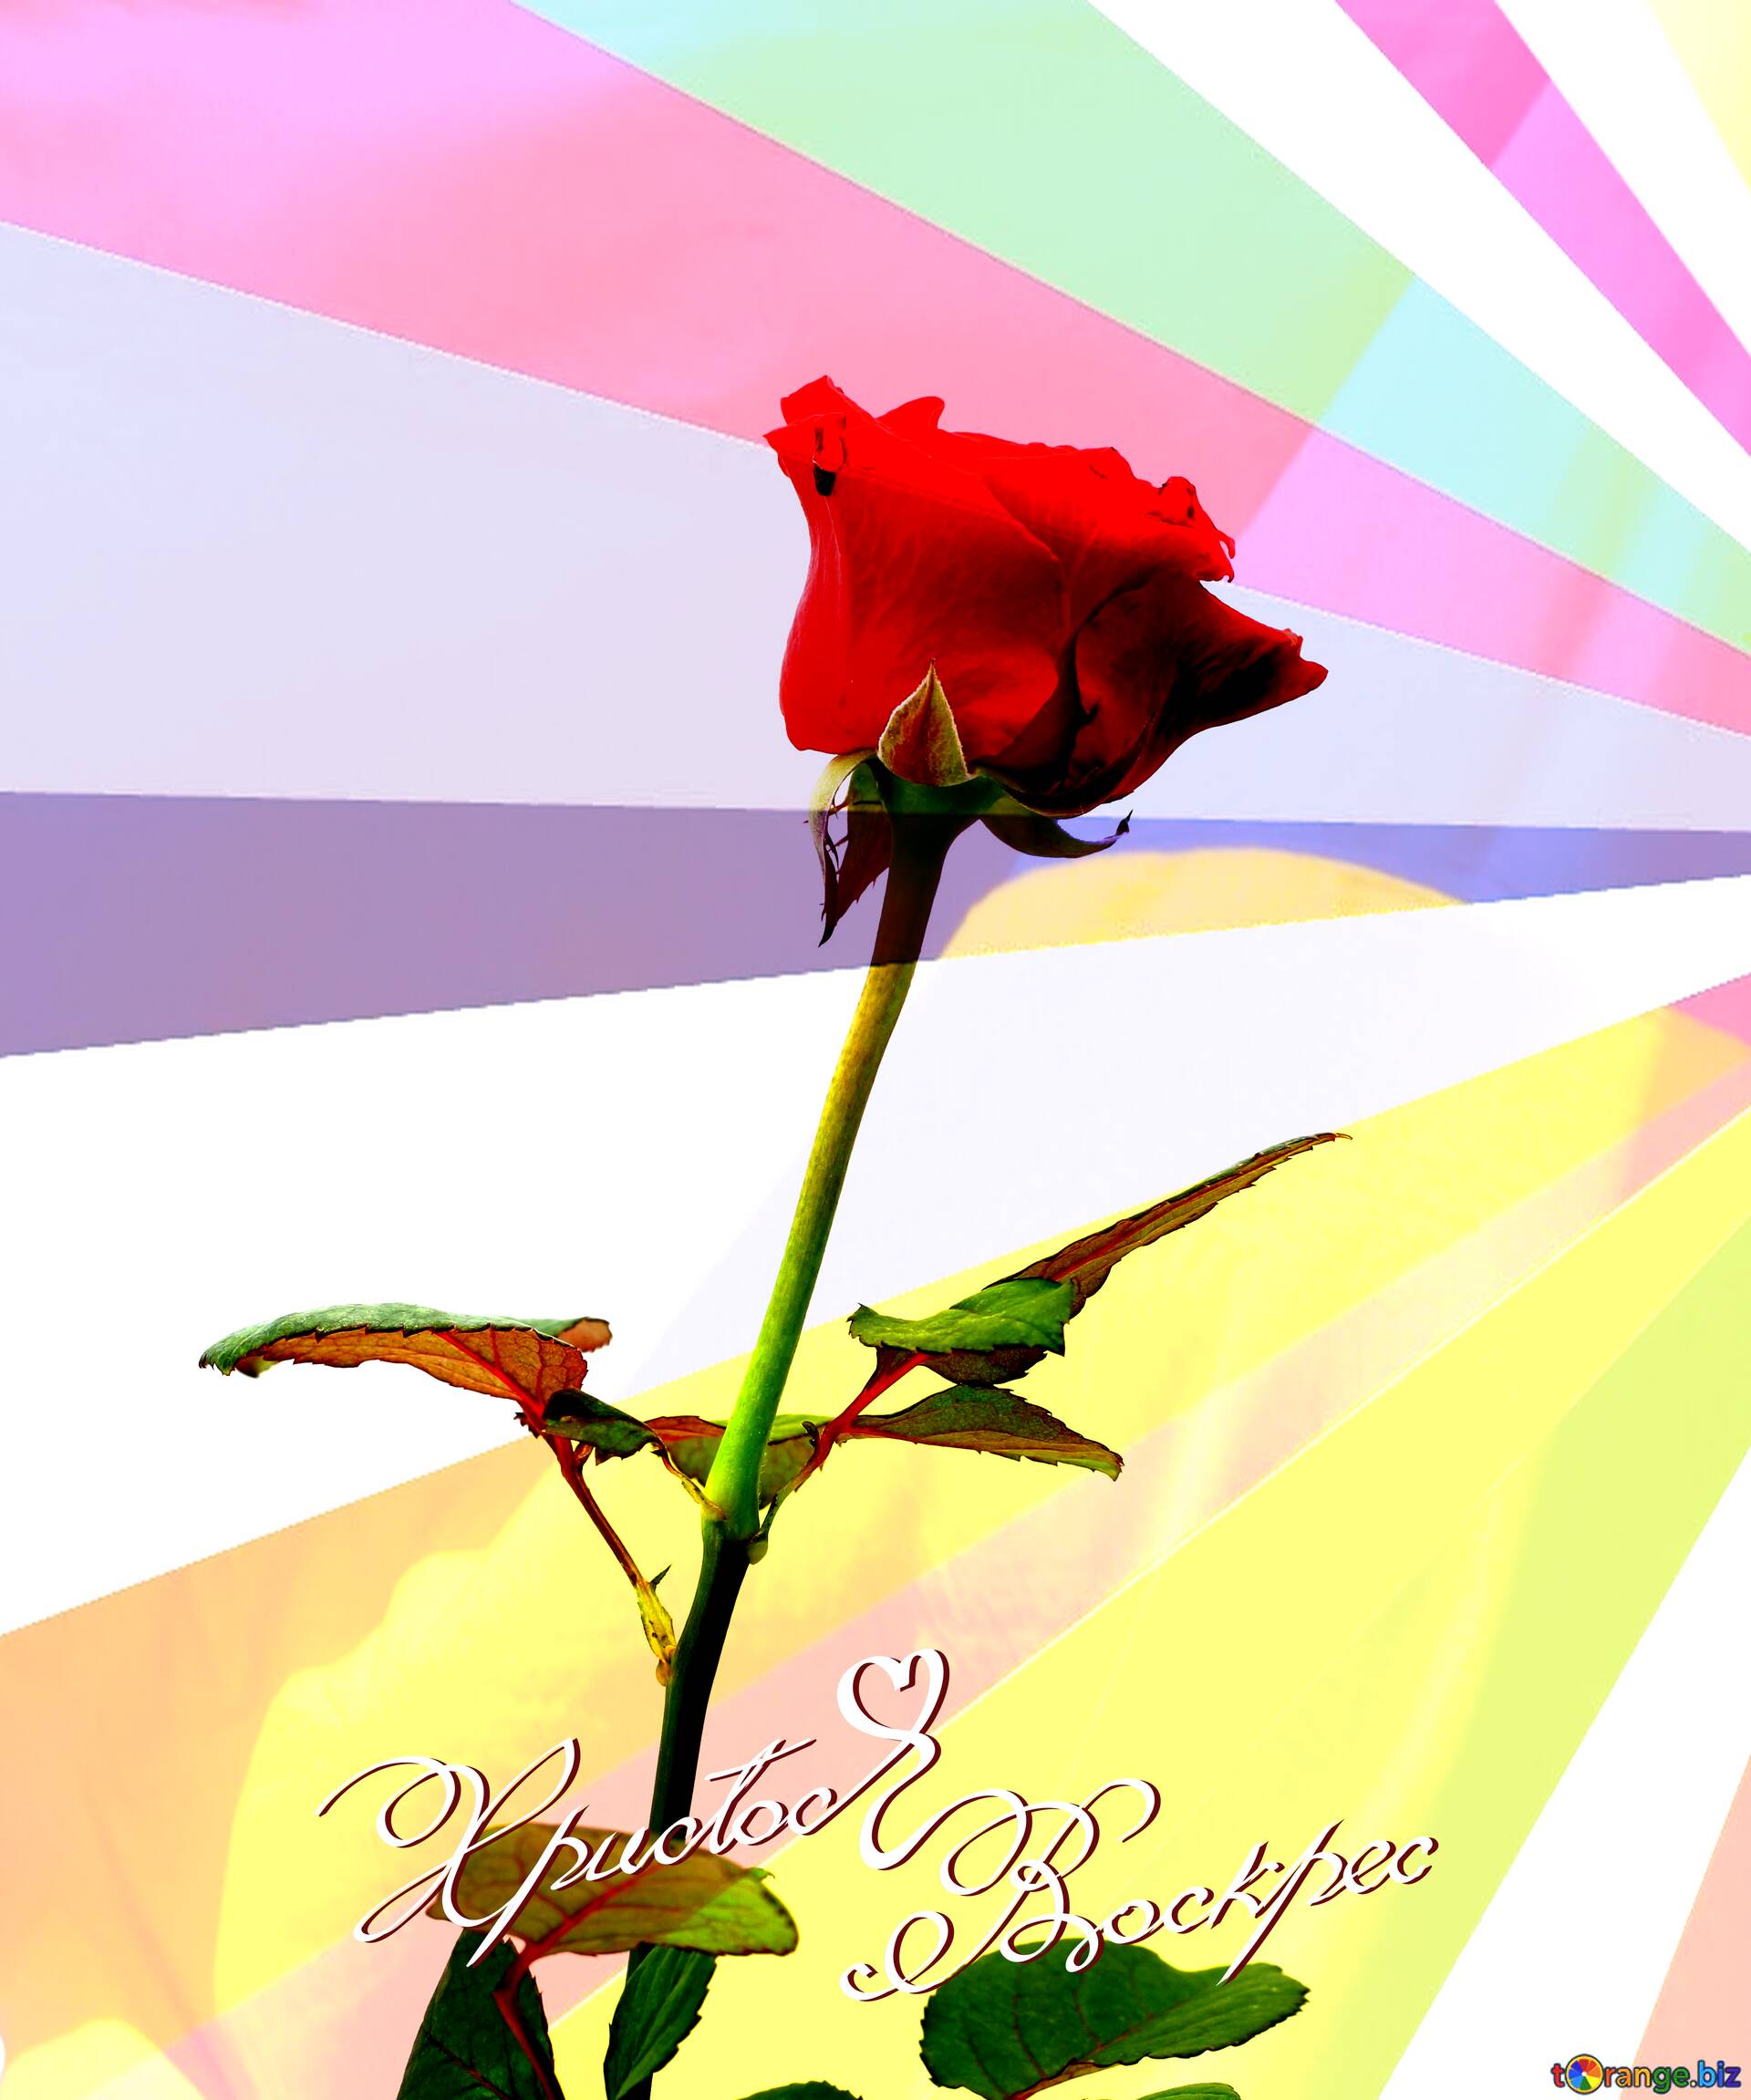 Download free picture Russian easter card with red rose on CCBY